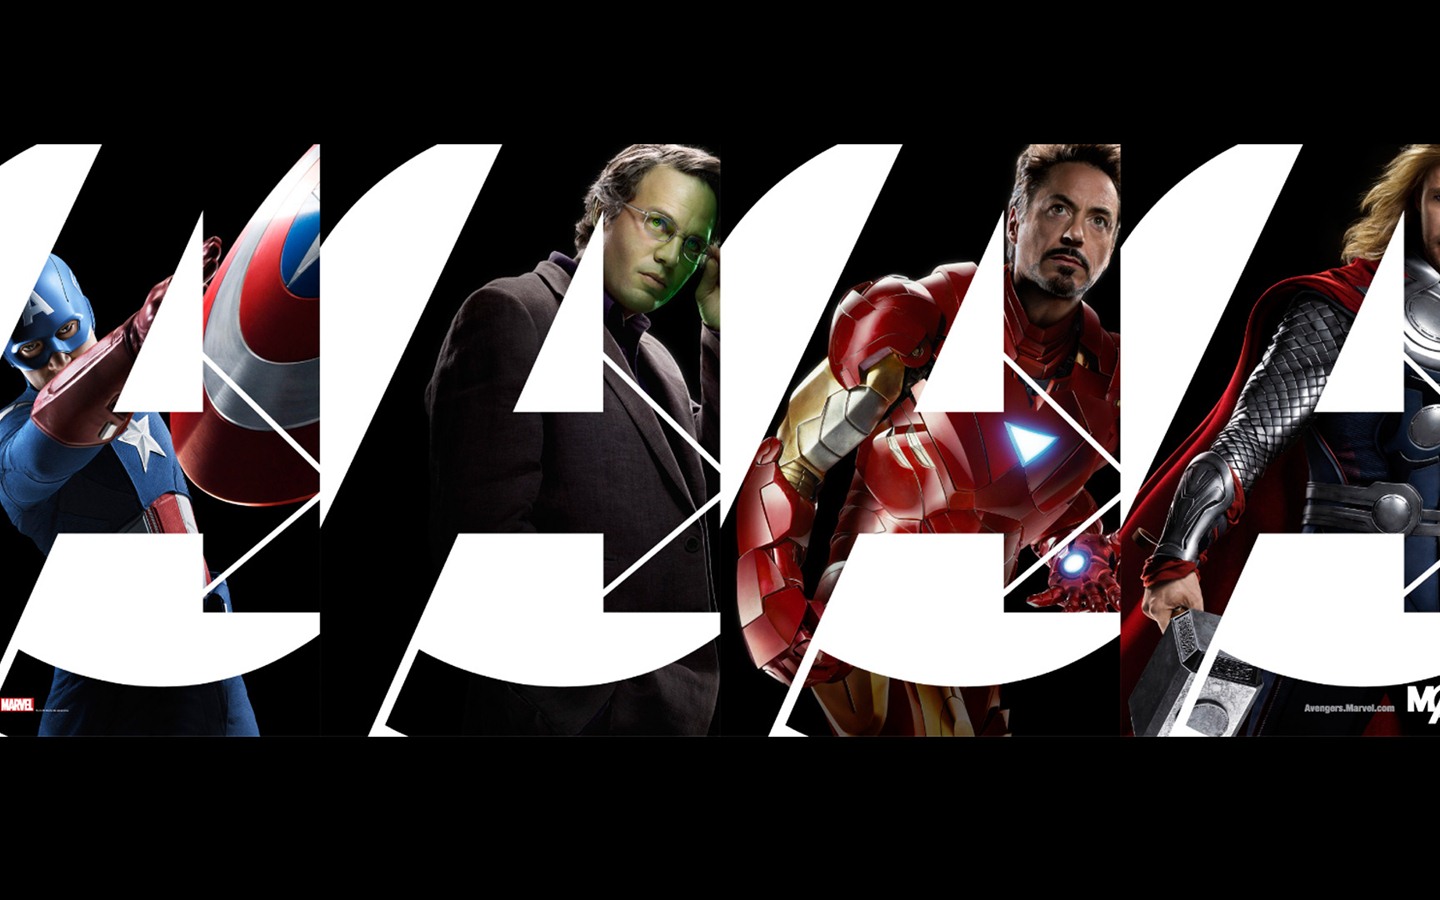 The Avengers 2012 HD wallpapers #9 - 1440x900